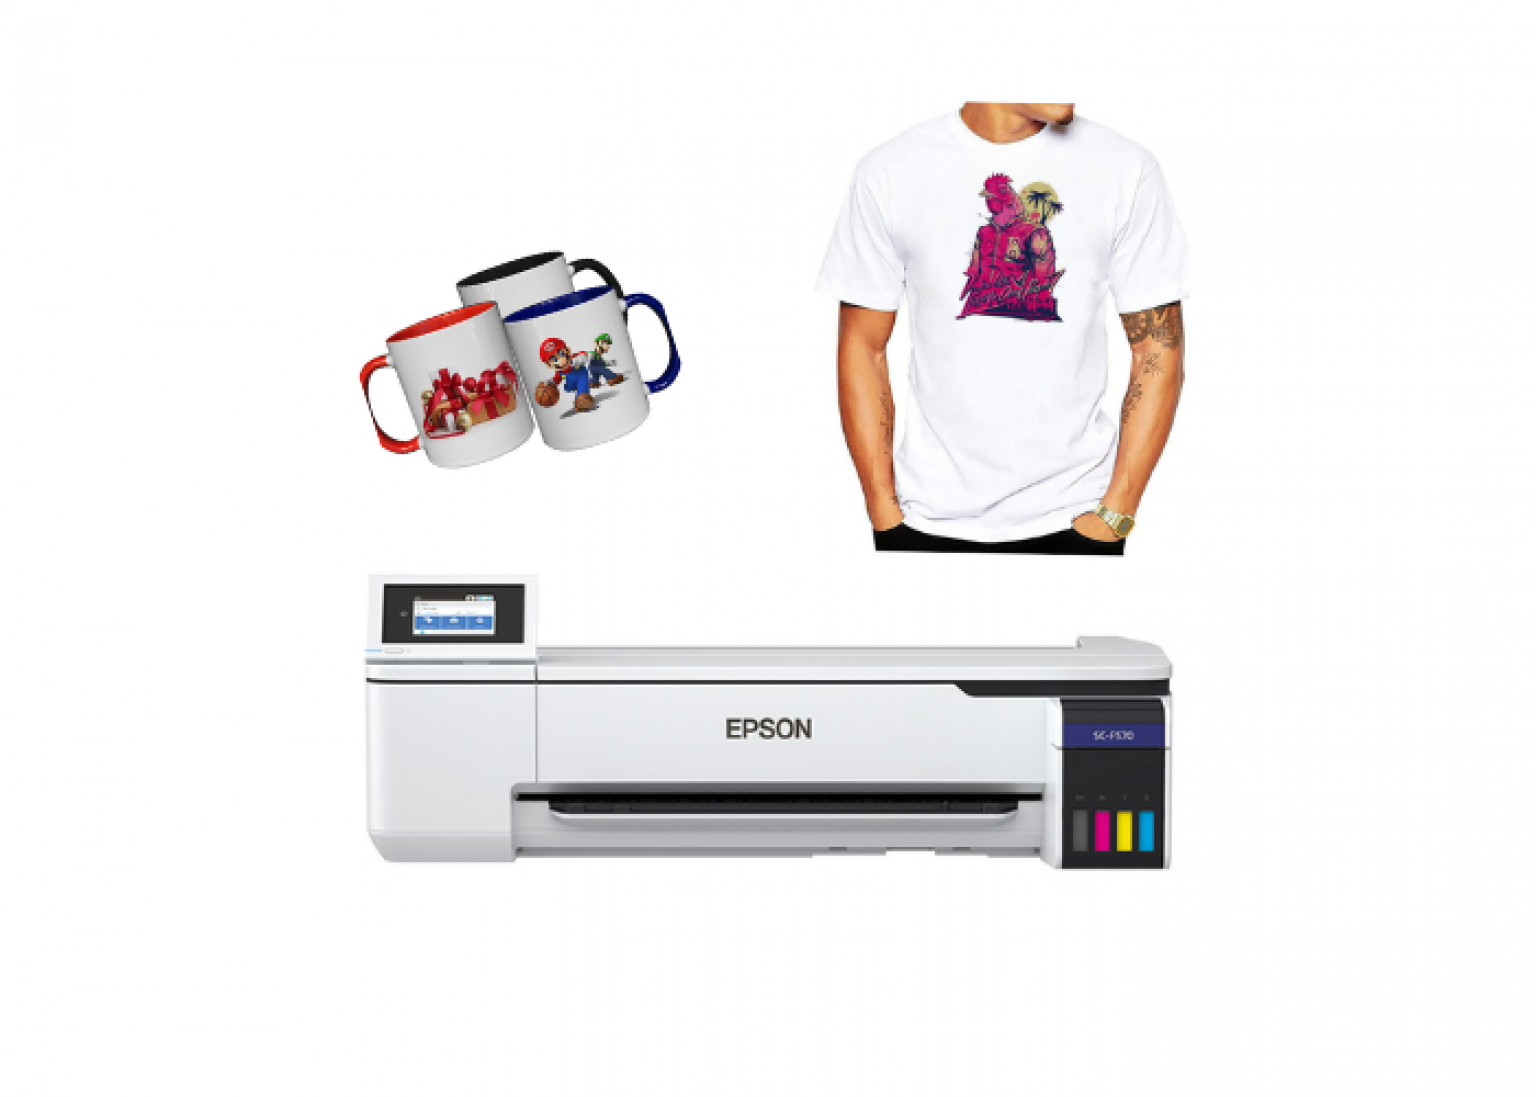 Dye Sublimation Printers What Are They Used For Printysublimation 0327